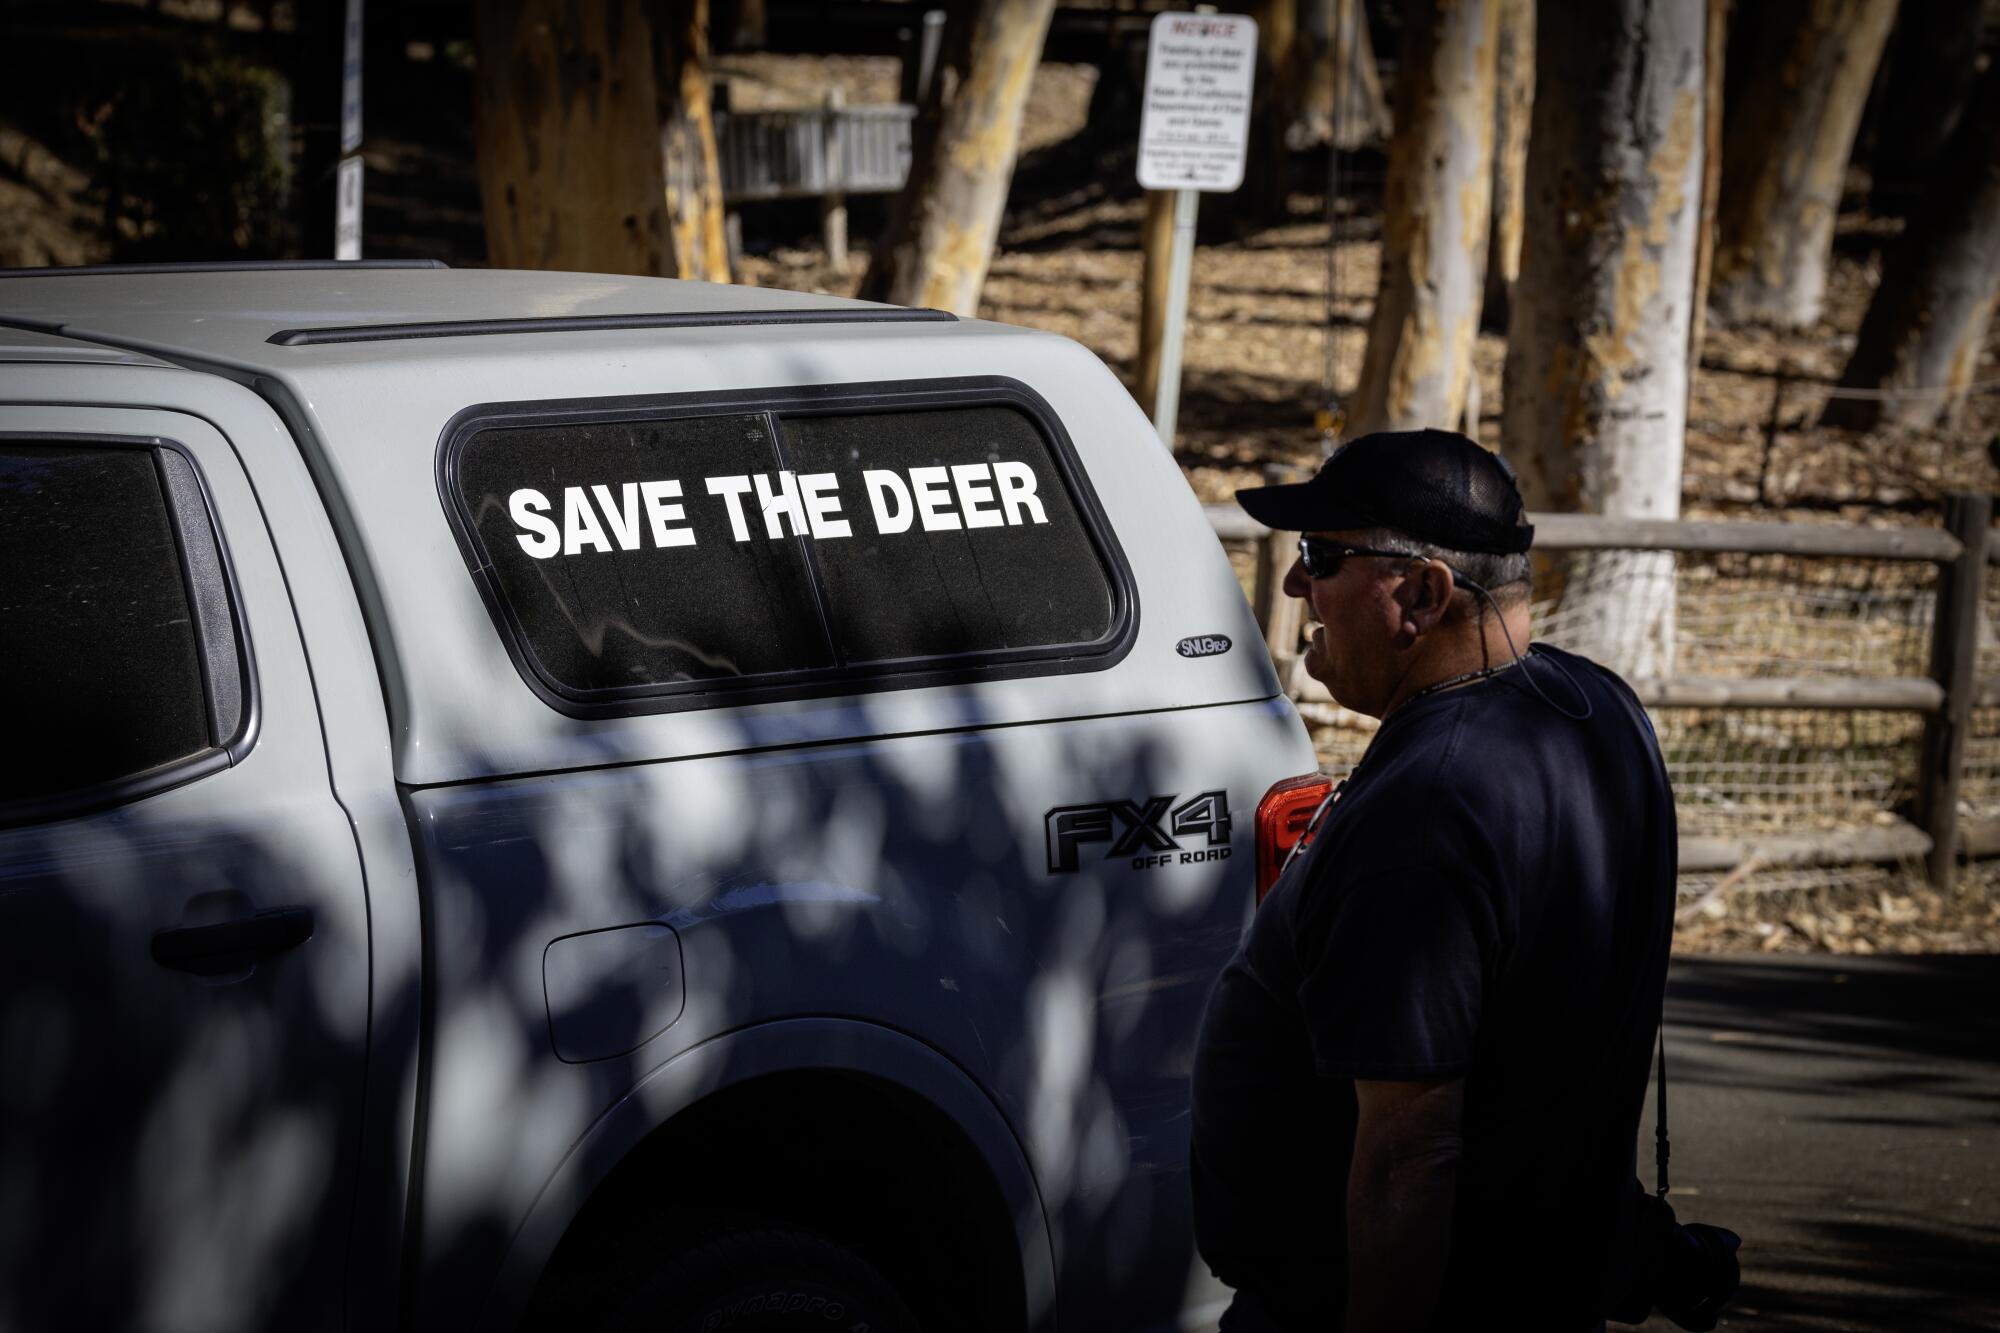 A man stands beside a truck that bears the message "Save the deer."